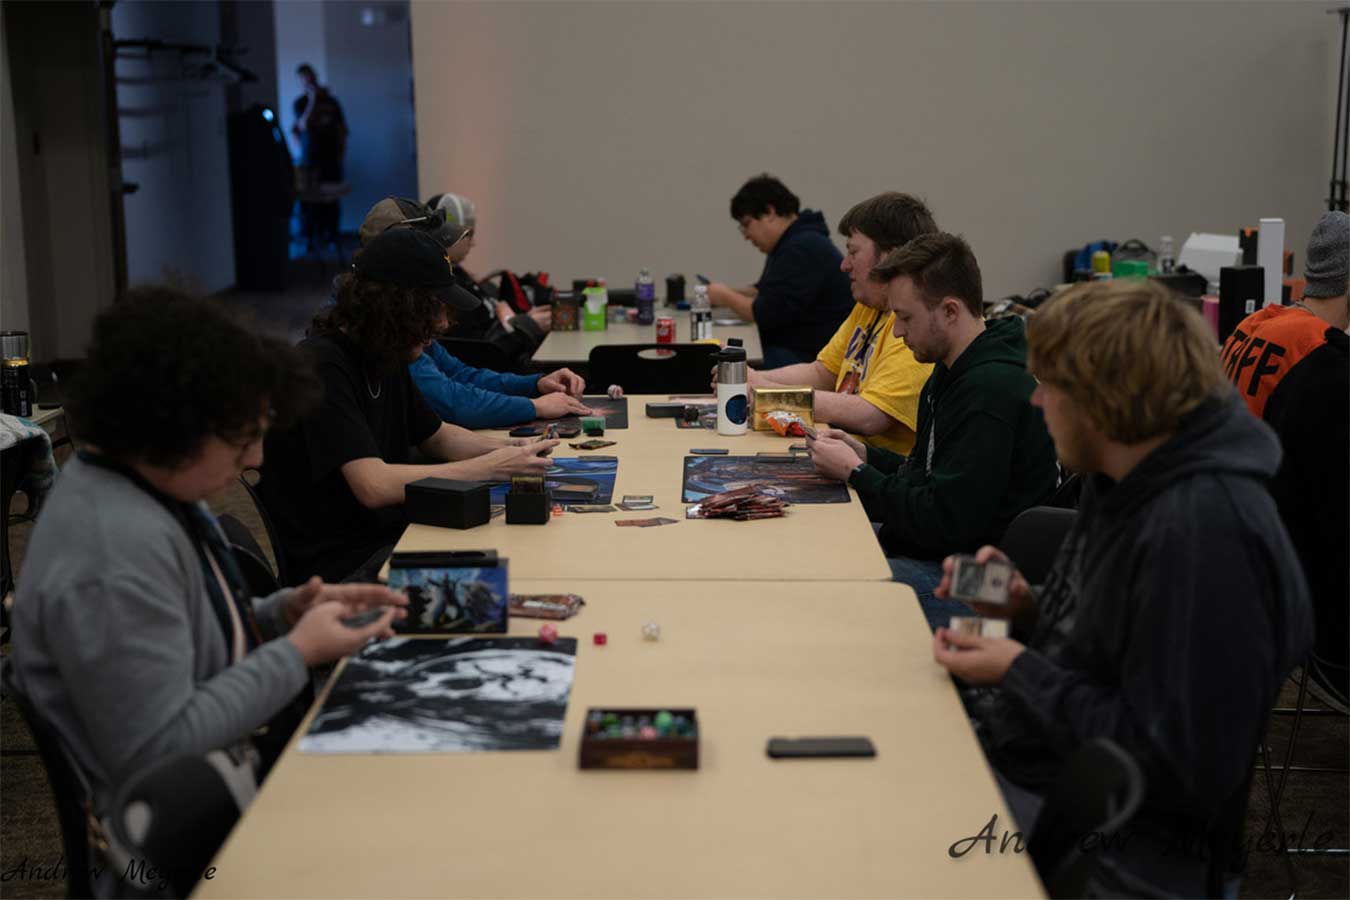 Nanocon attendees playing a game. Photo by Andrew Meyerle.